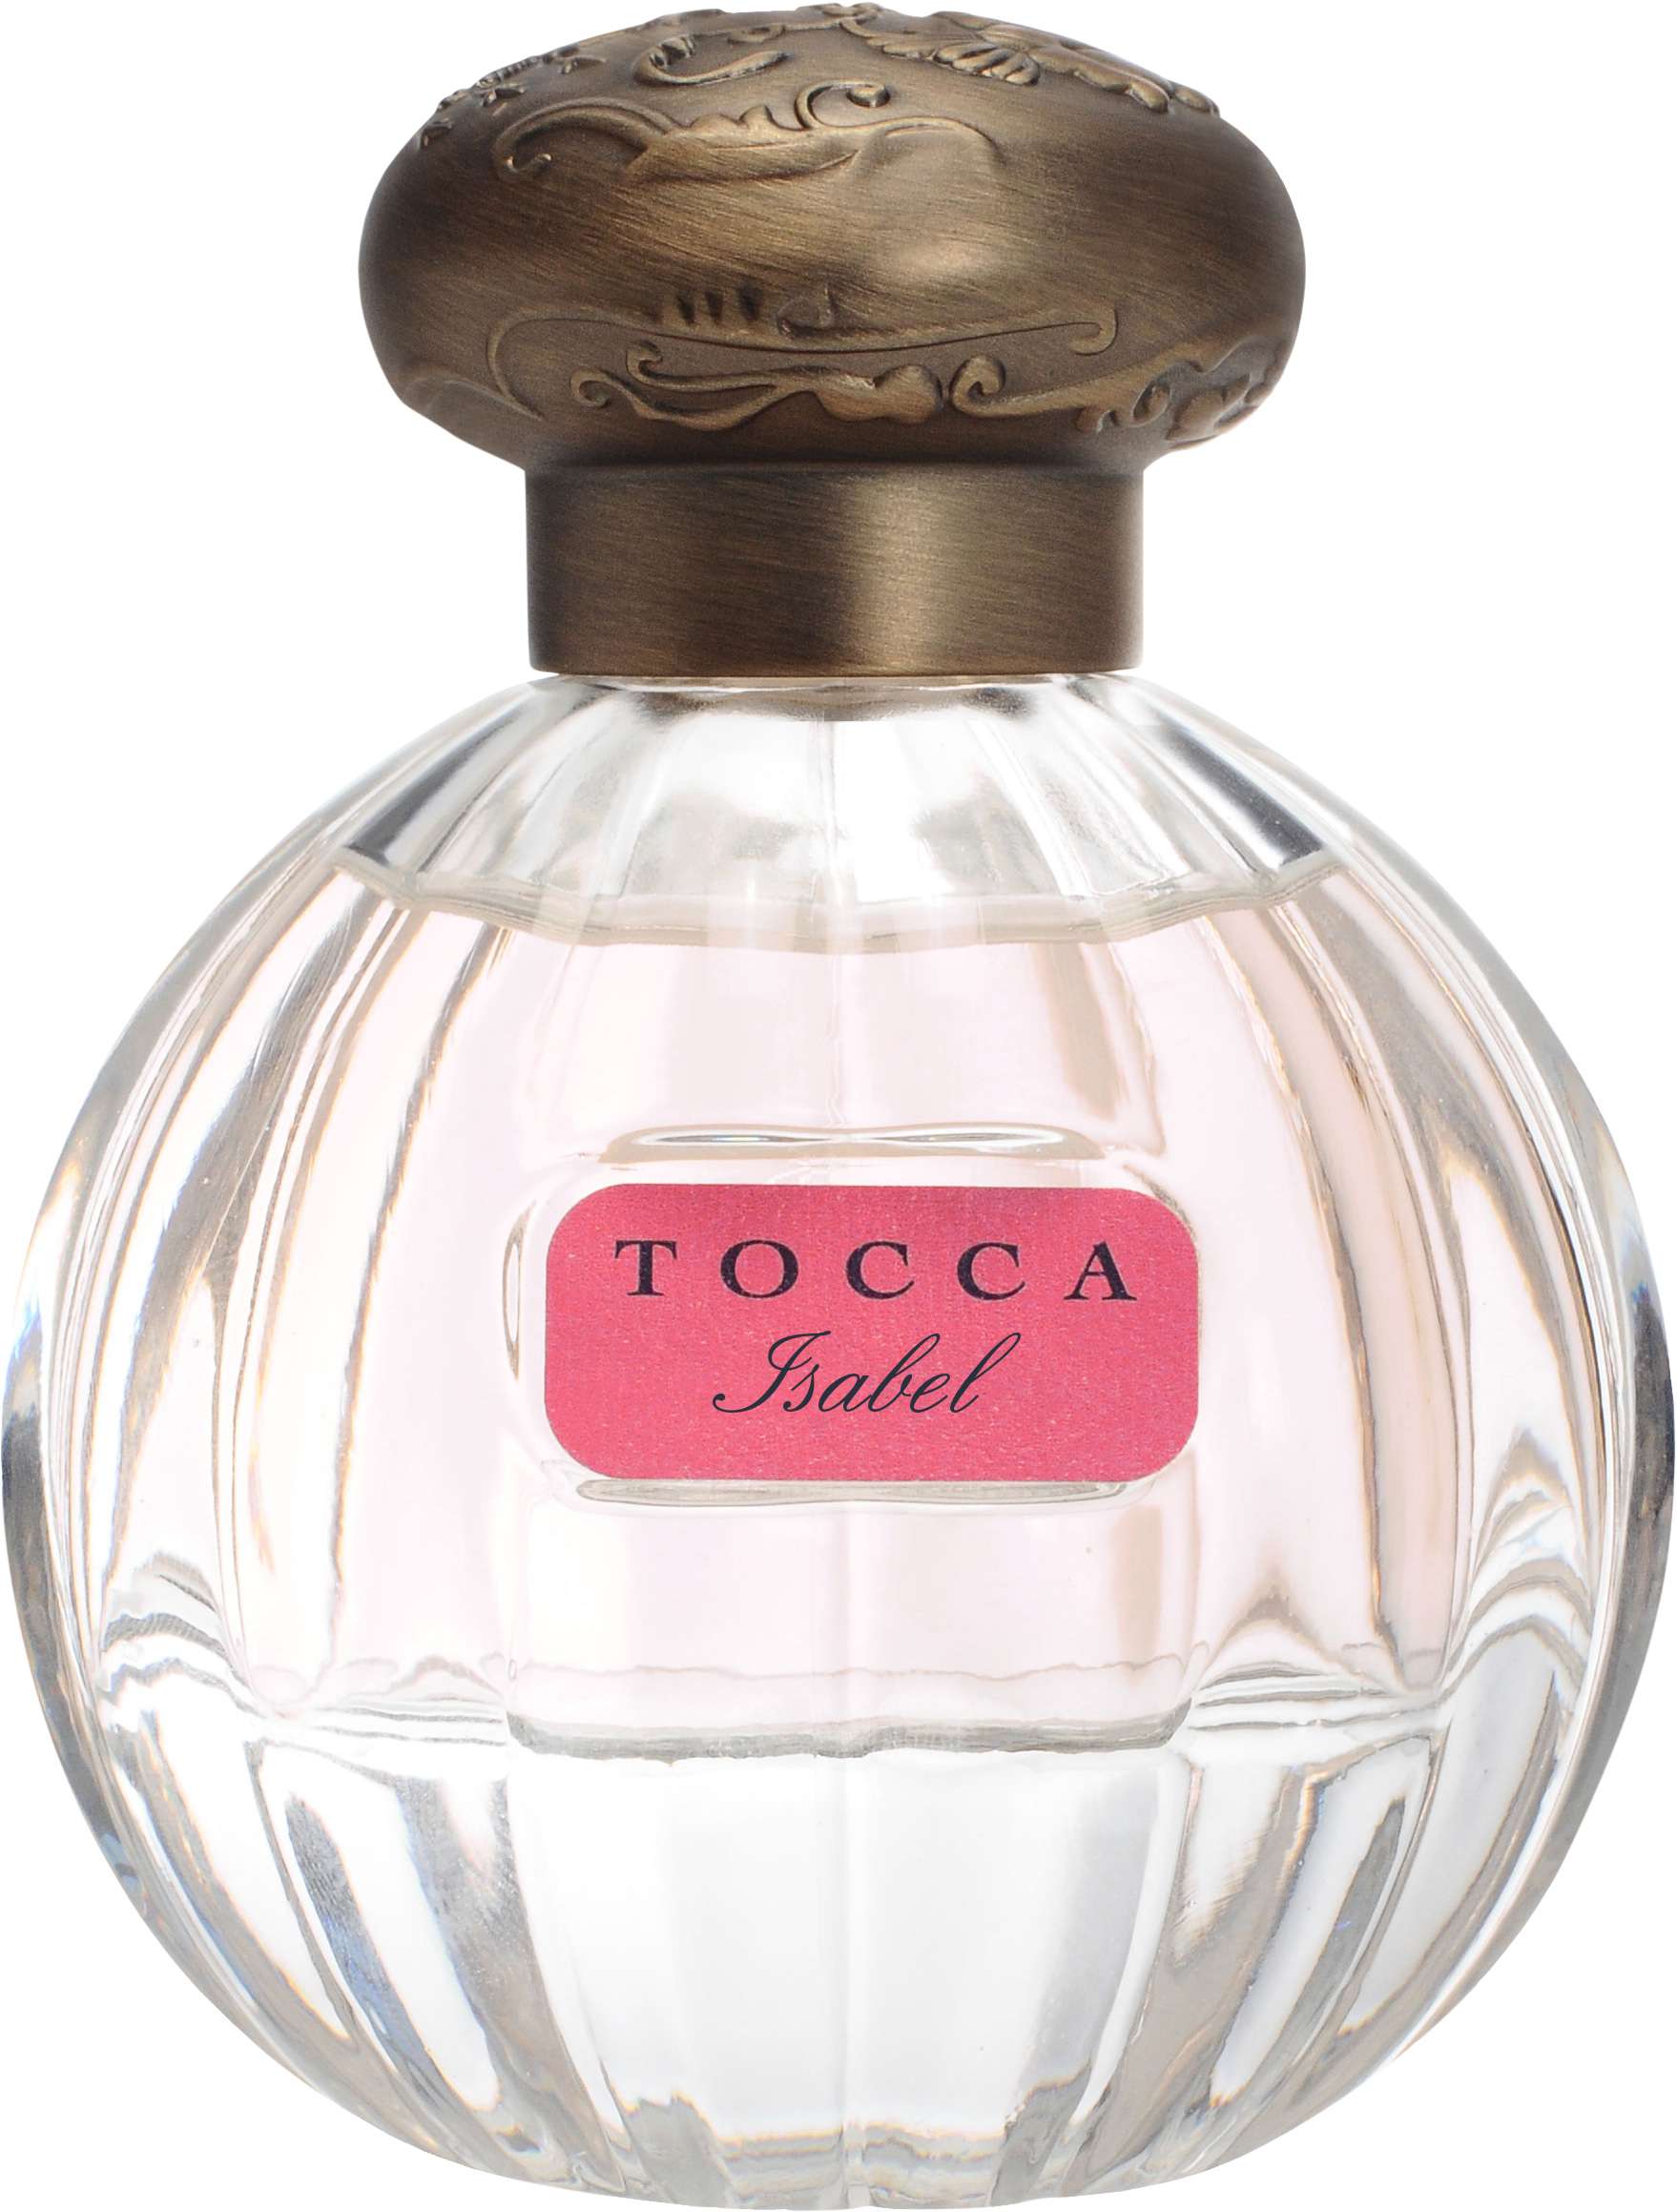 Tocca - Isabel EDP 50 ml